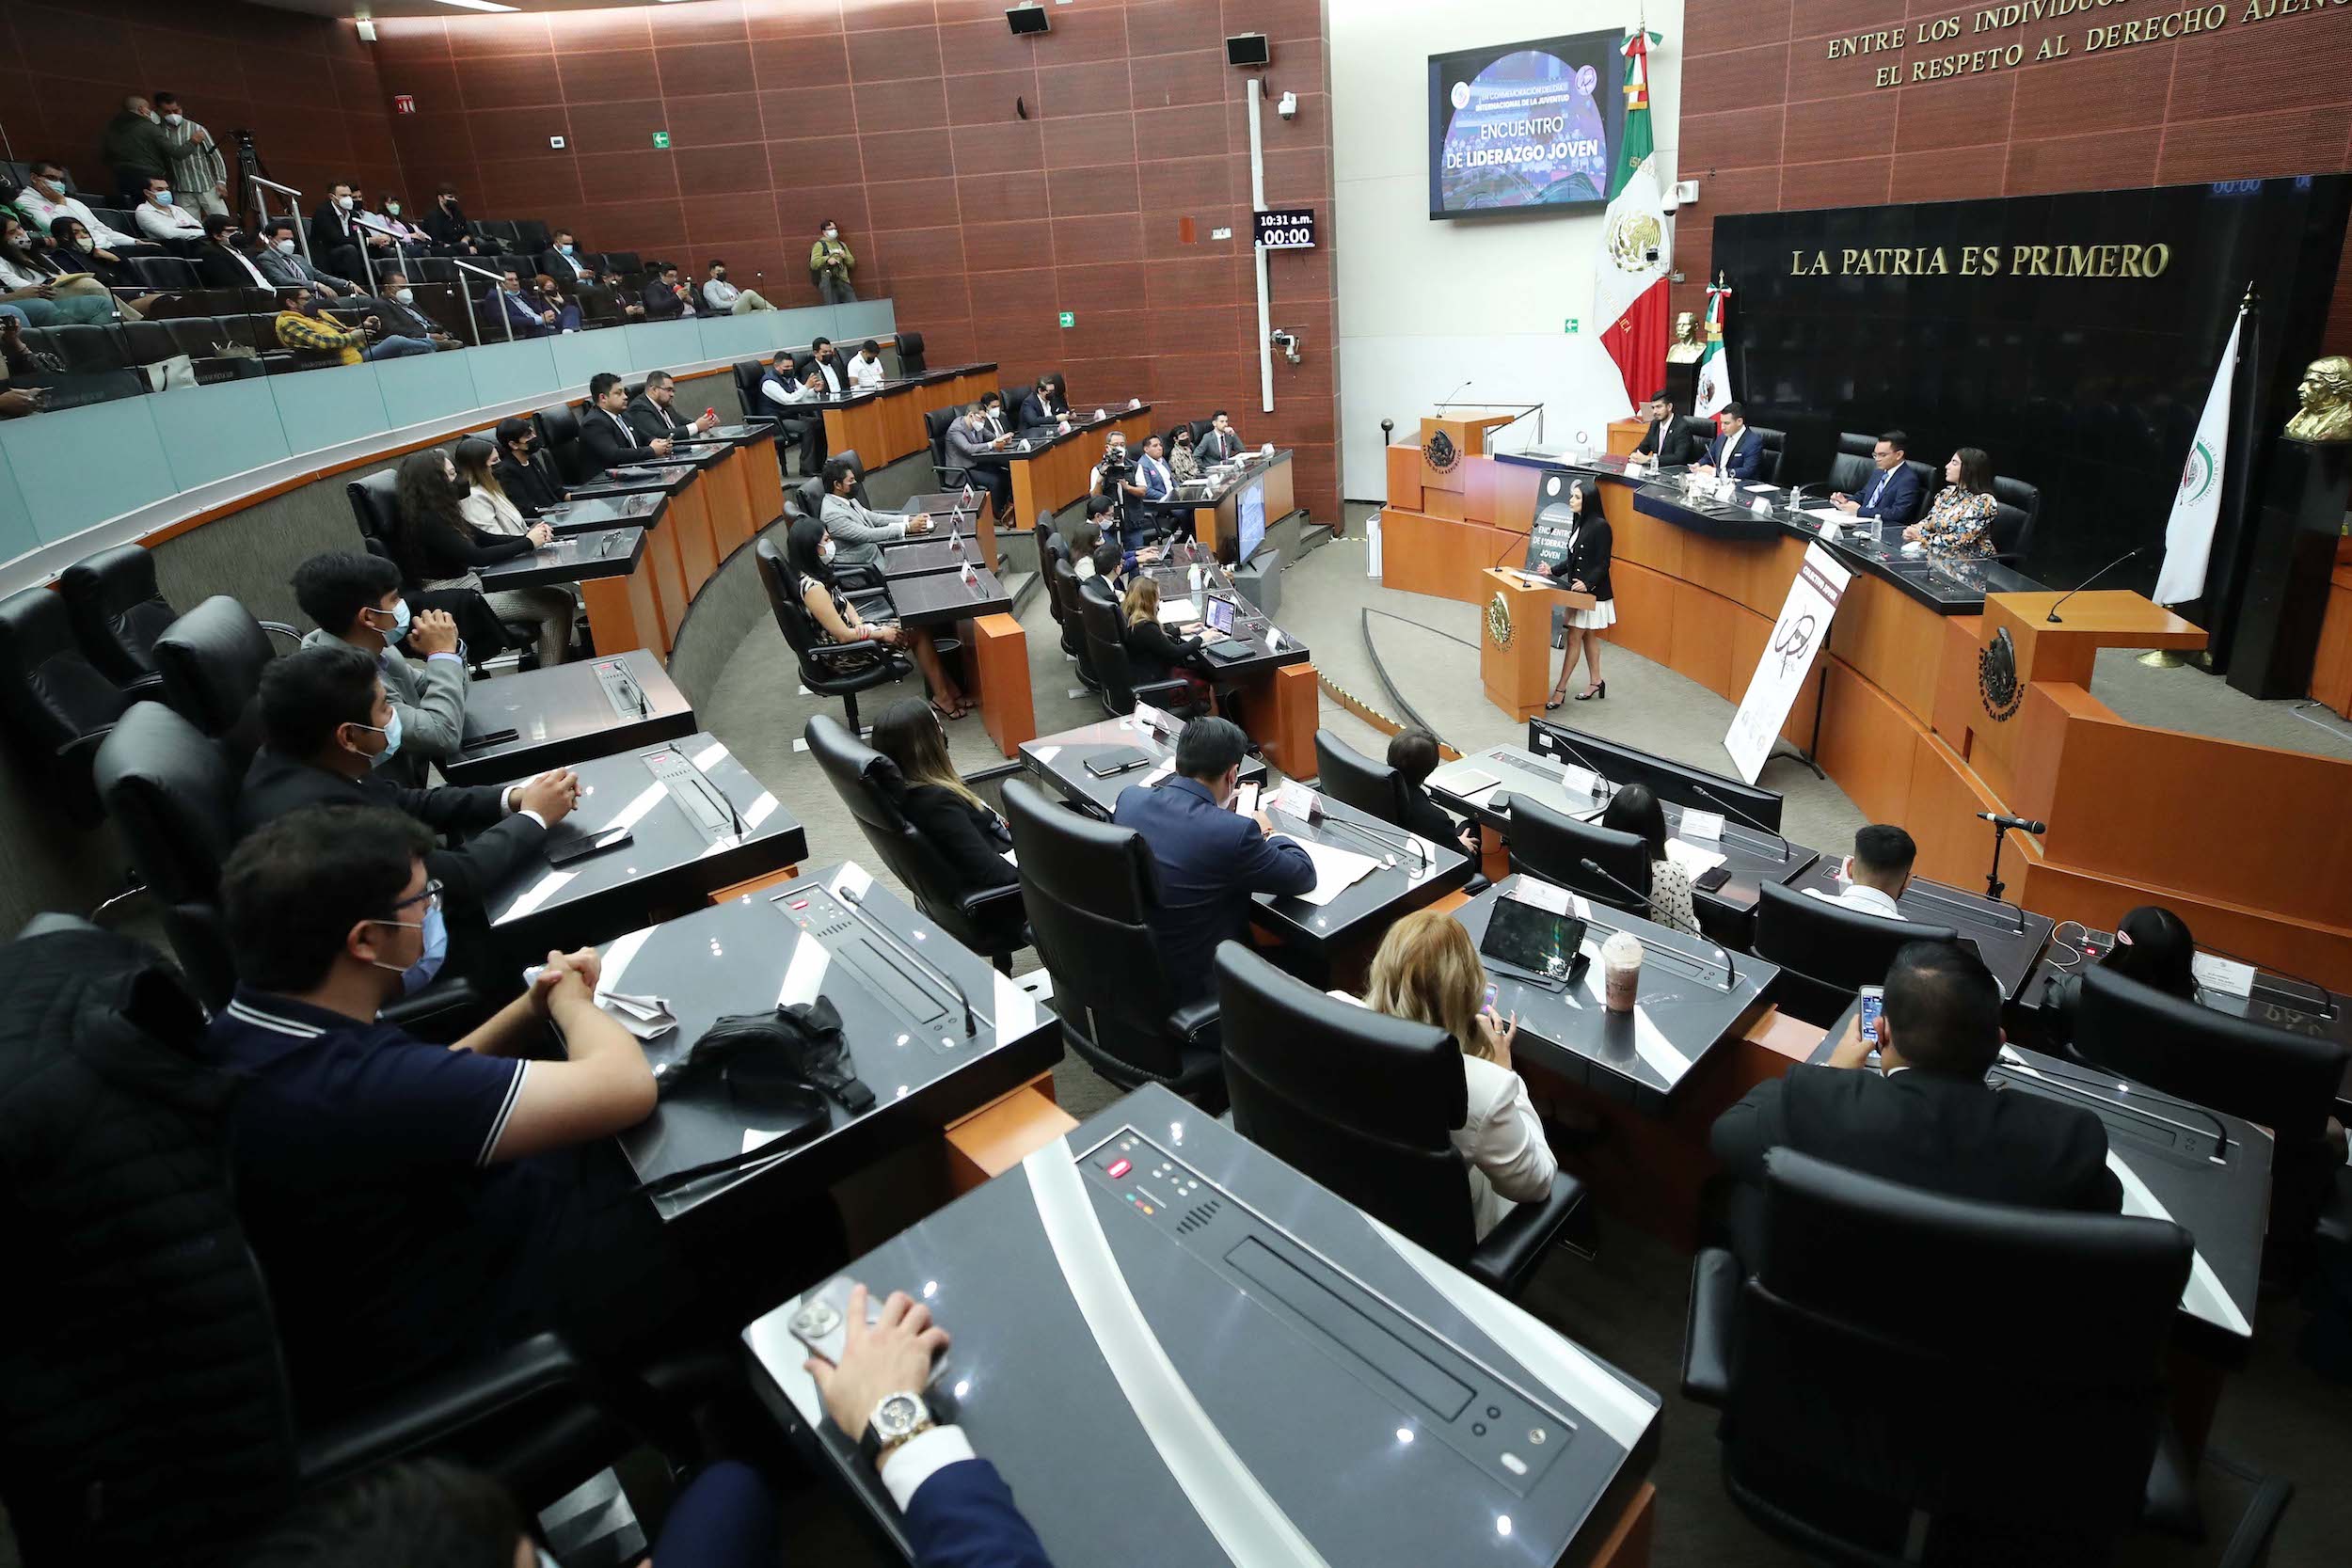 Senators understand that Mexico will face complex negotiations in the T-MEC consultation phase